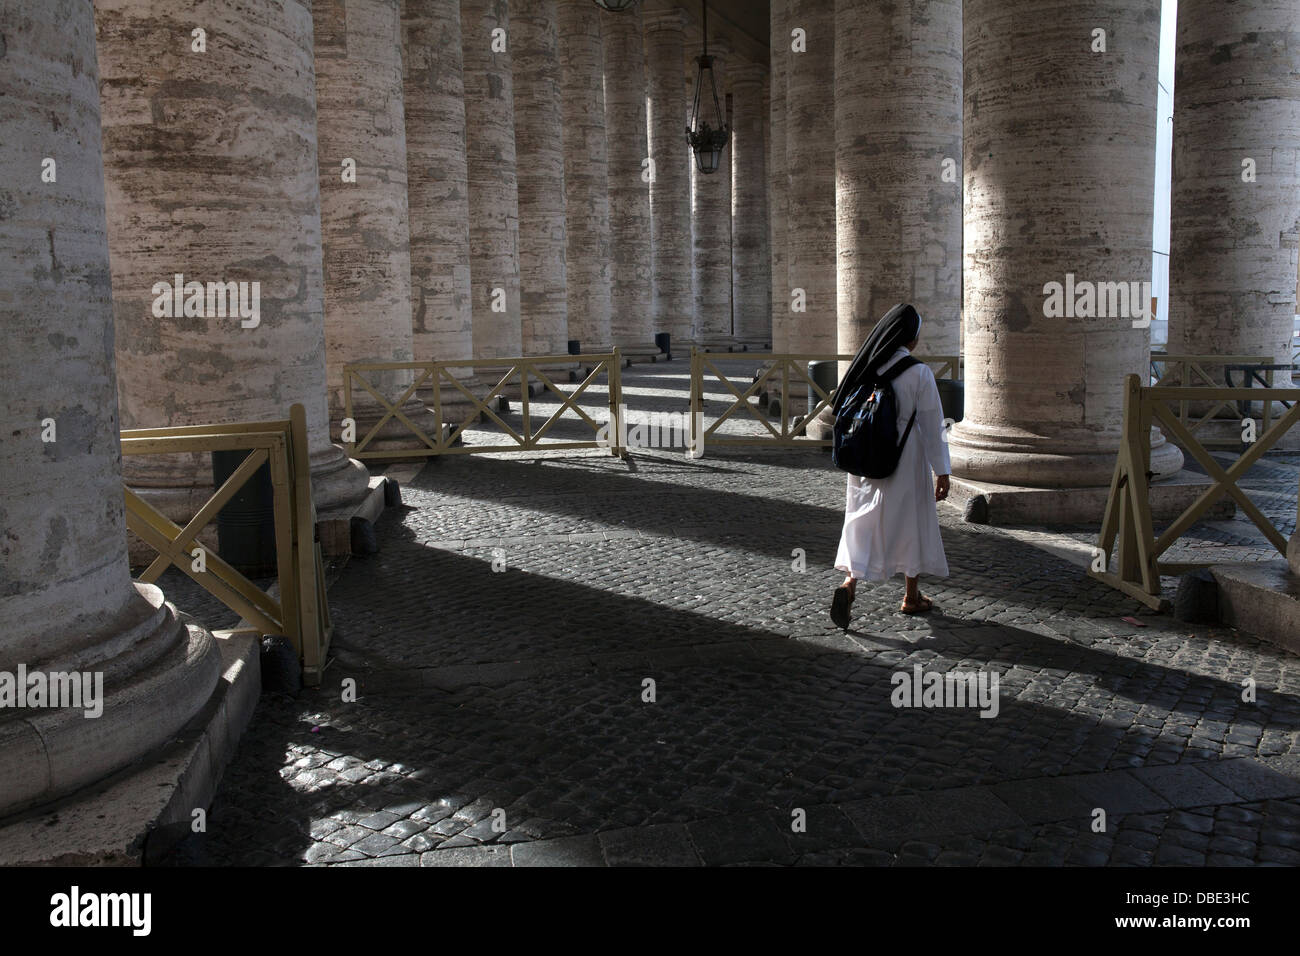 A nuns through Bernini's colonnade in St. Peter's Square at the Vatican, Rome Stock Photo